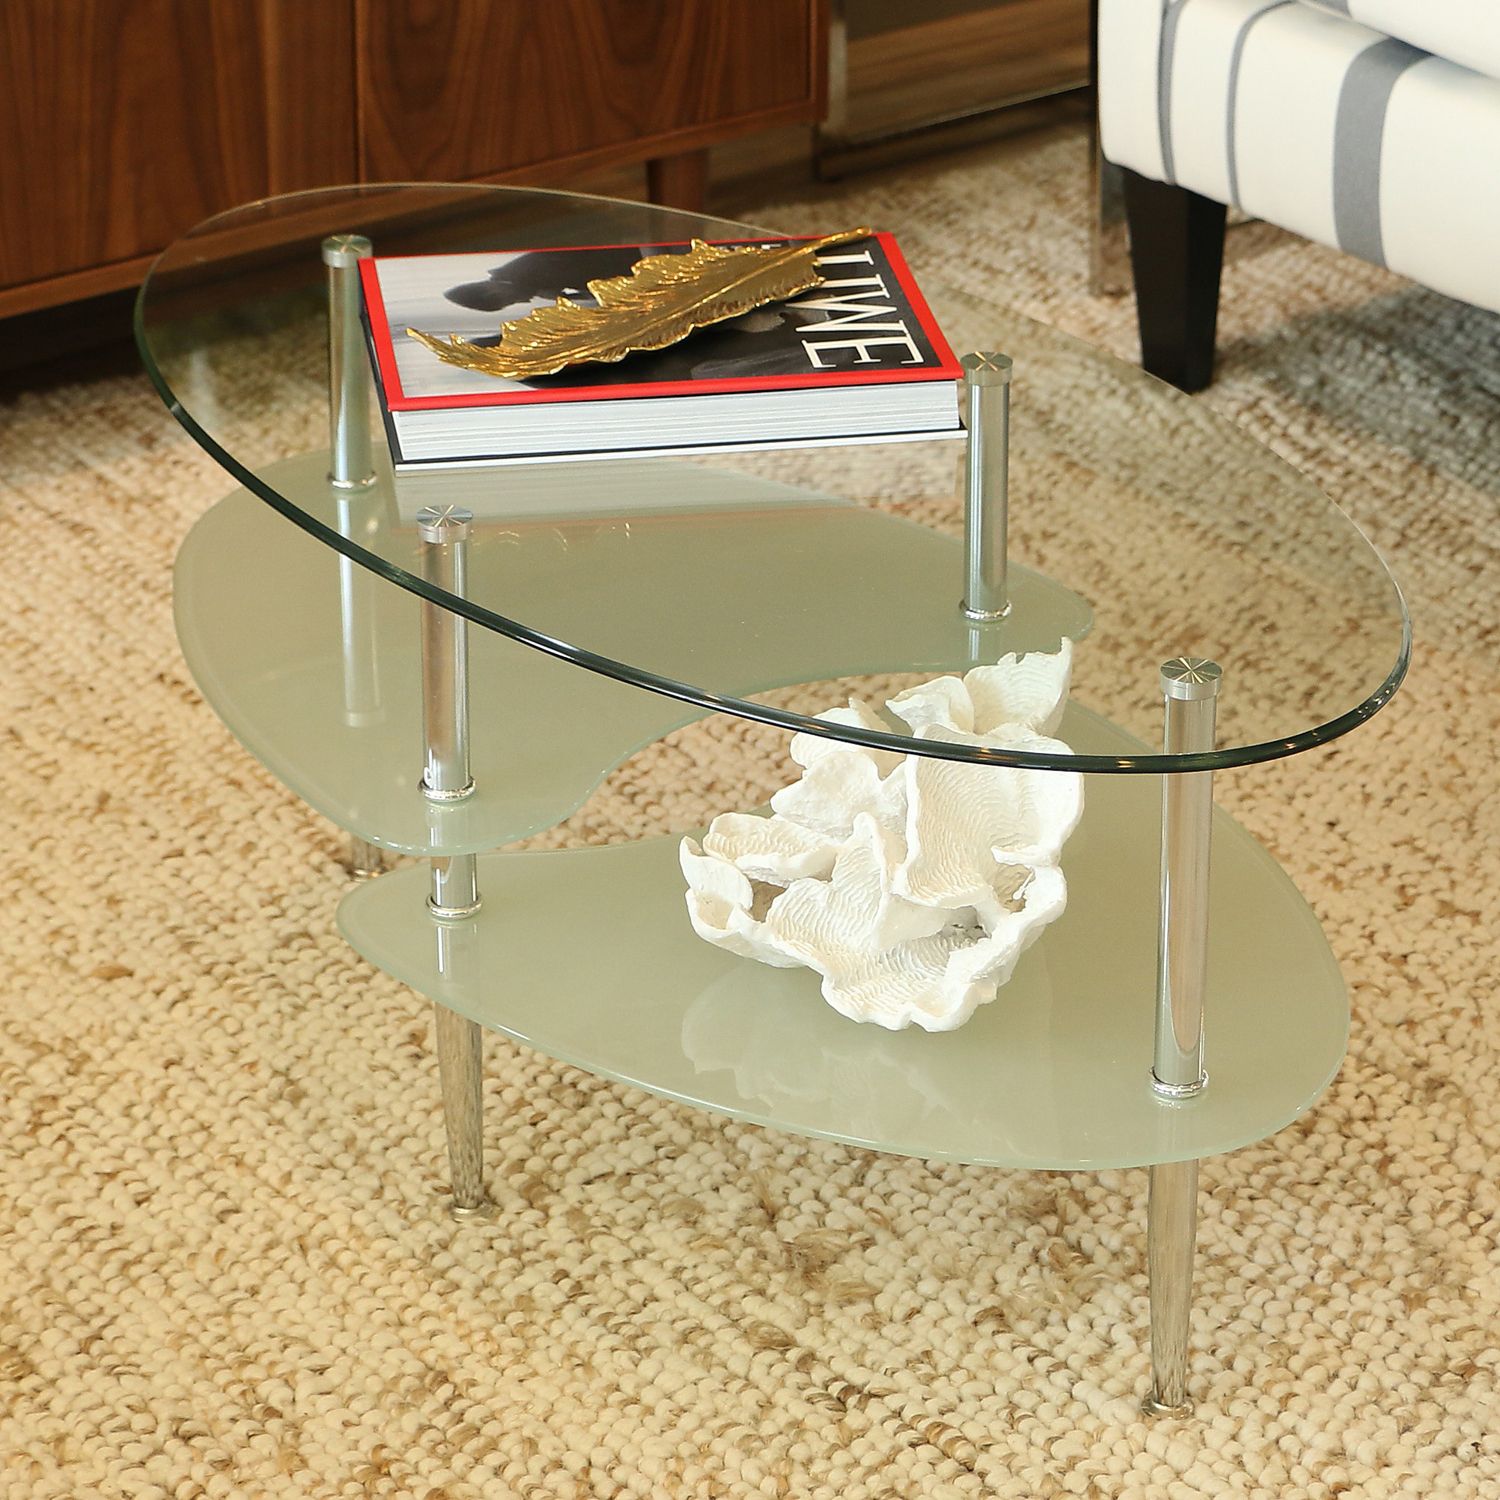 2020 Glass And Gold Oval Coffee Tables With Oval Glass Coffee Table With Chrome Legs – Pier1 Imports (View 6 of 20)